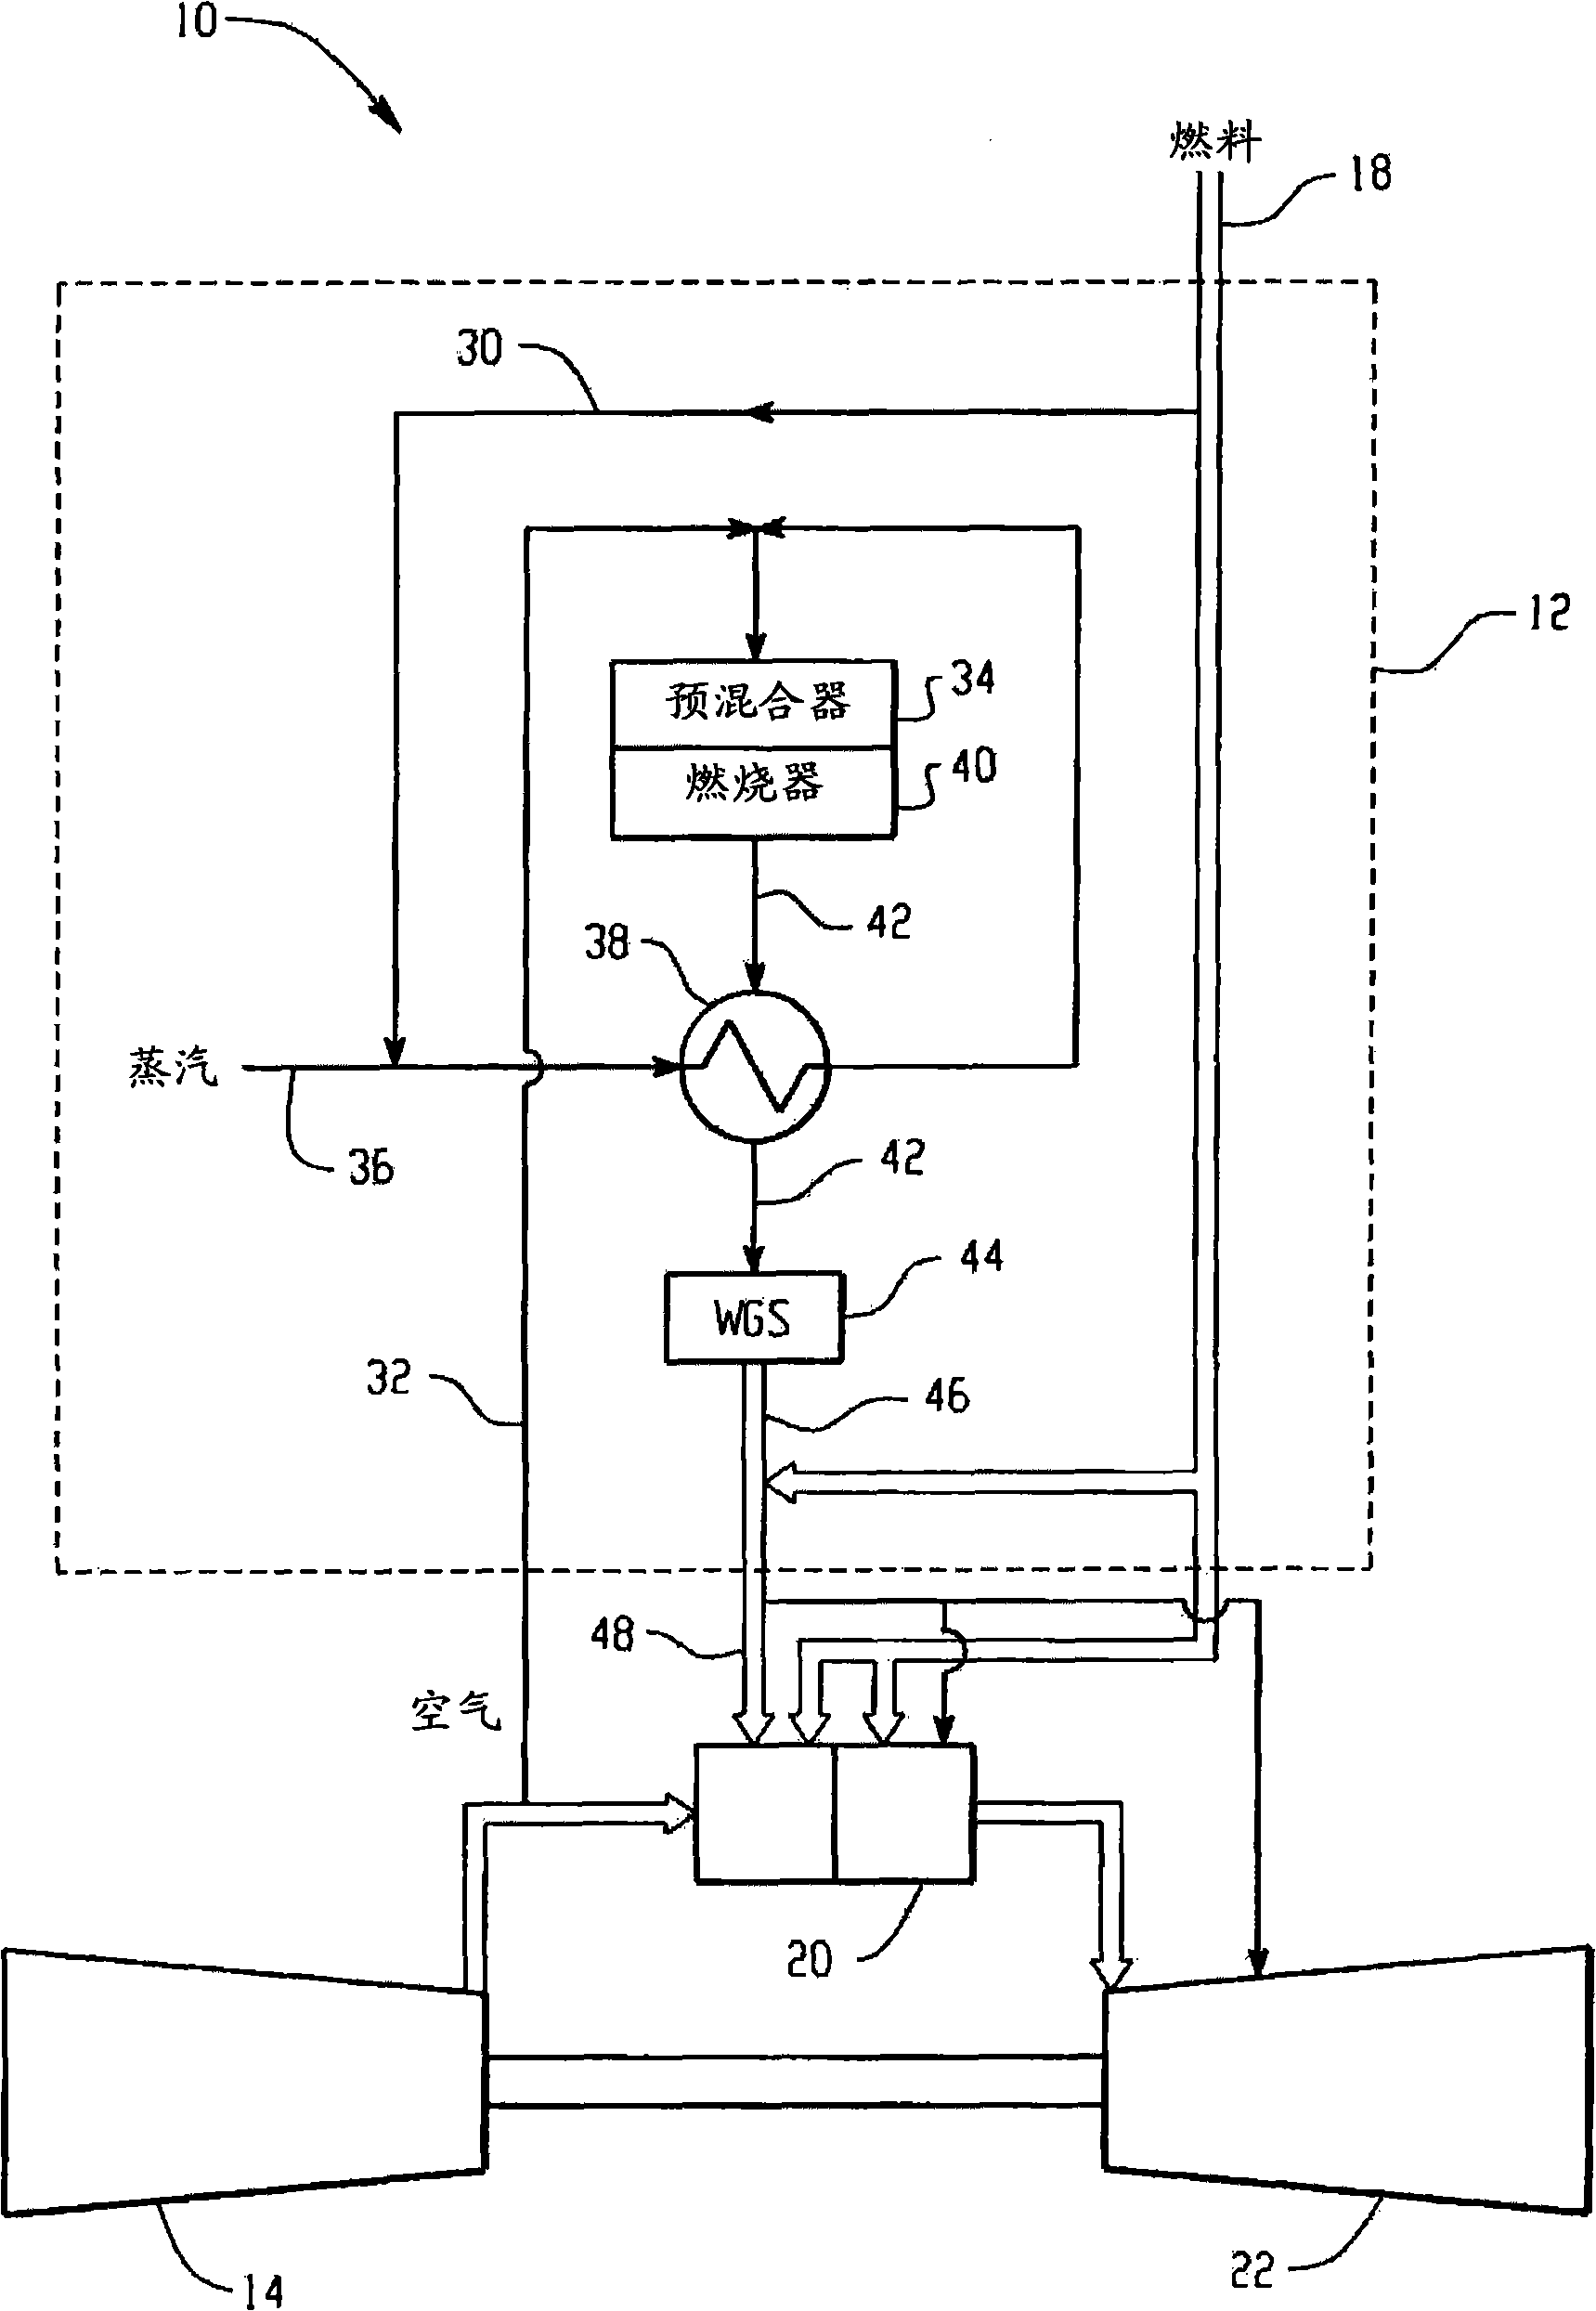 Premixed partial oxidation syngas generation and gas turbine system